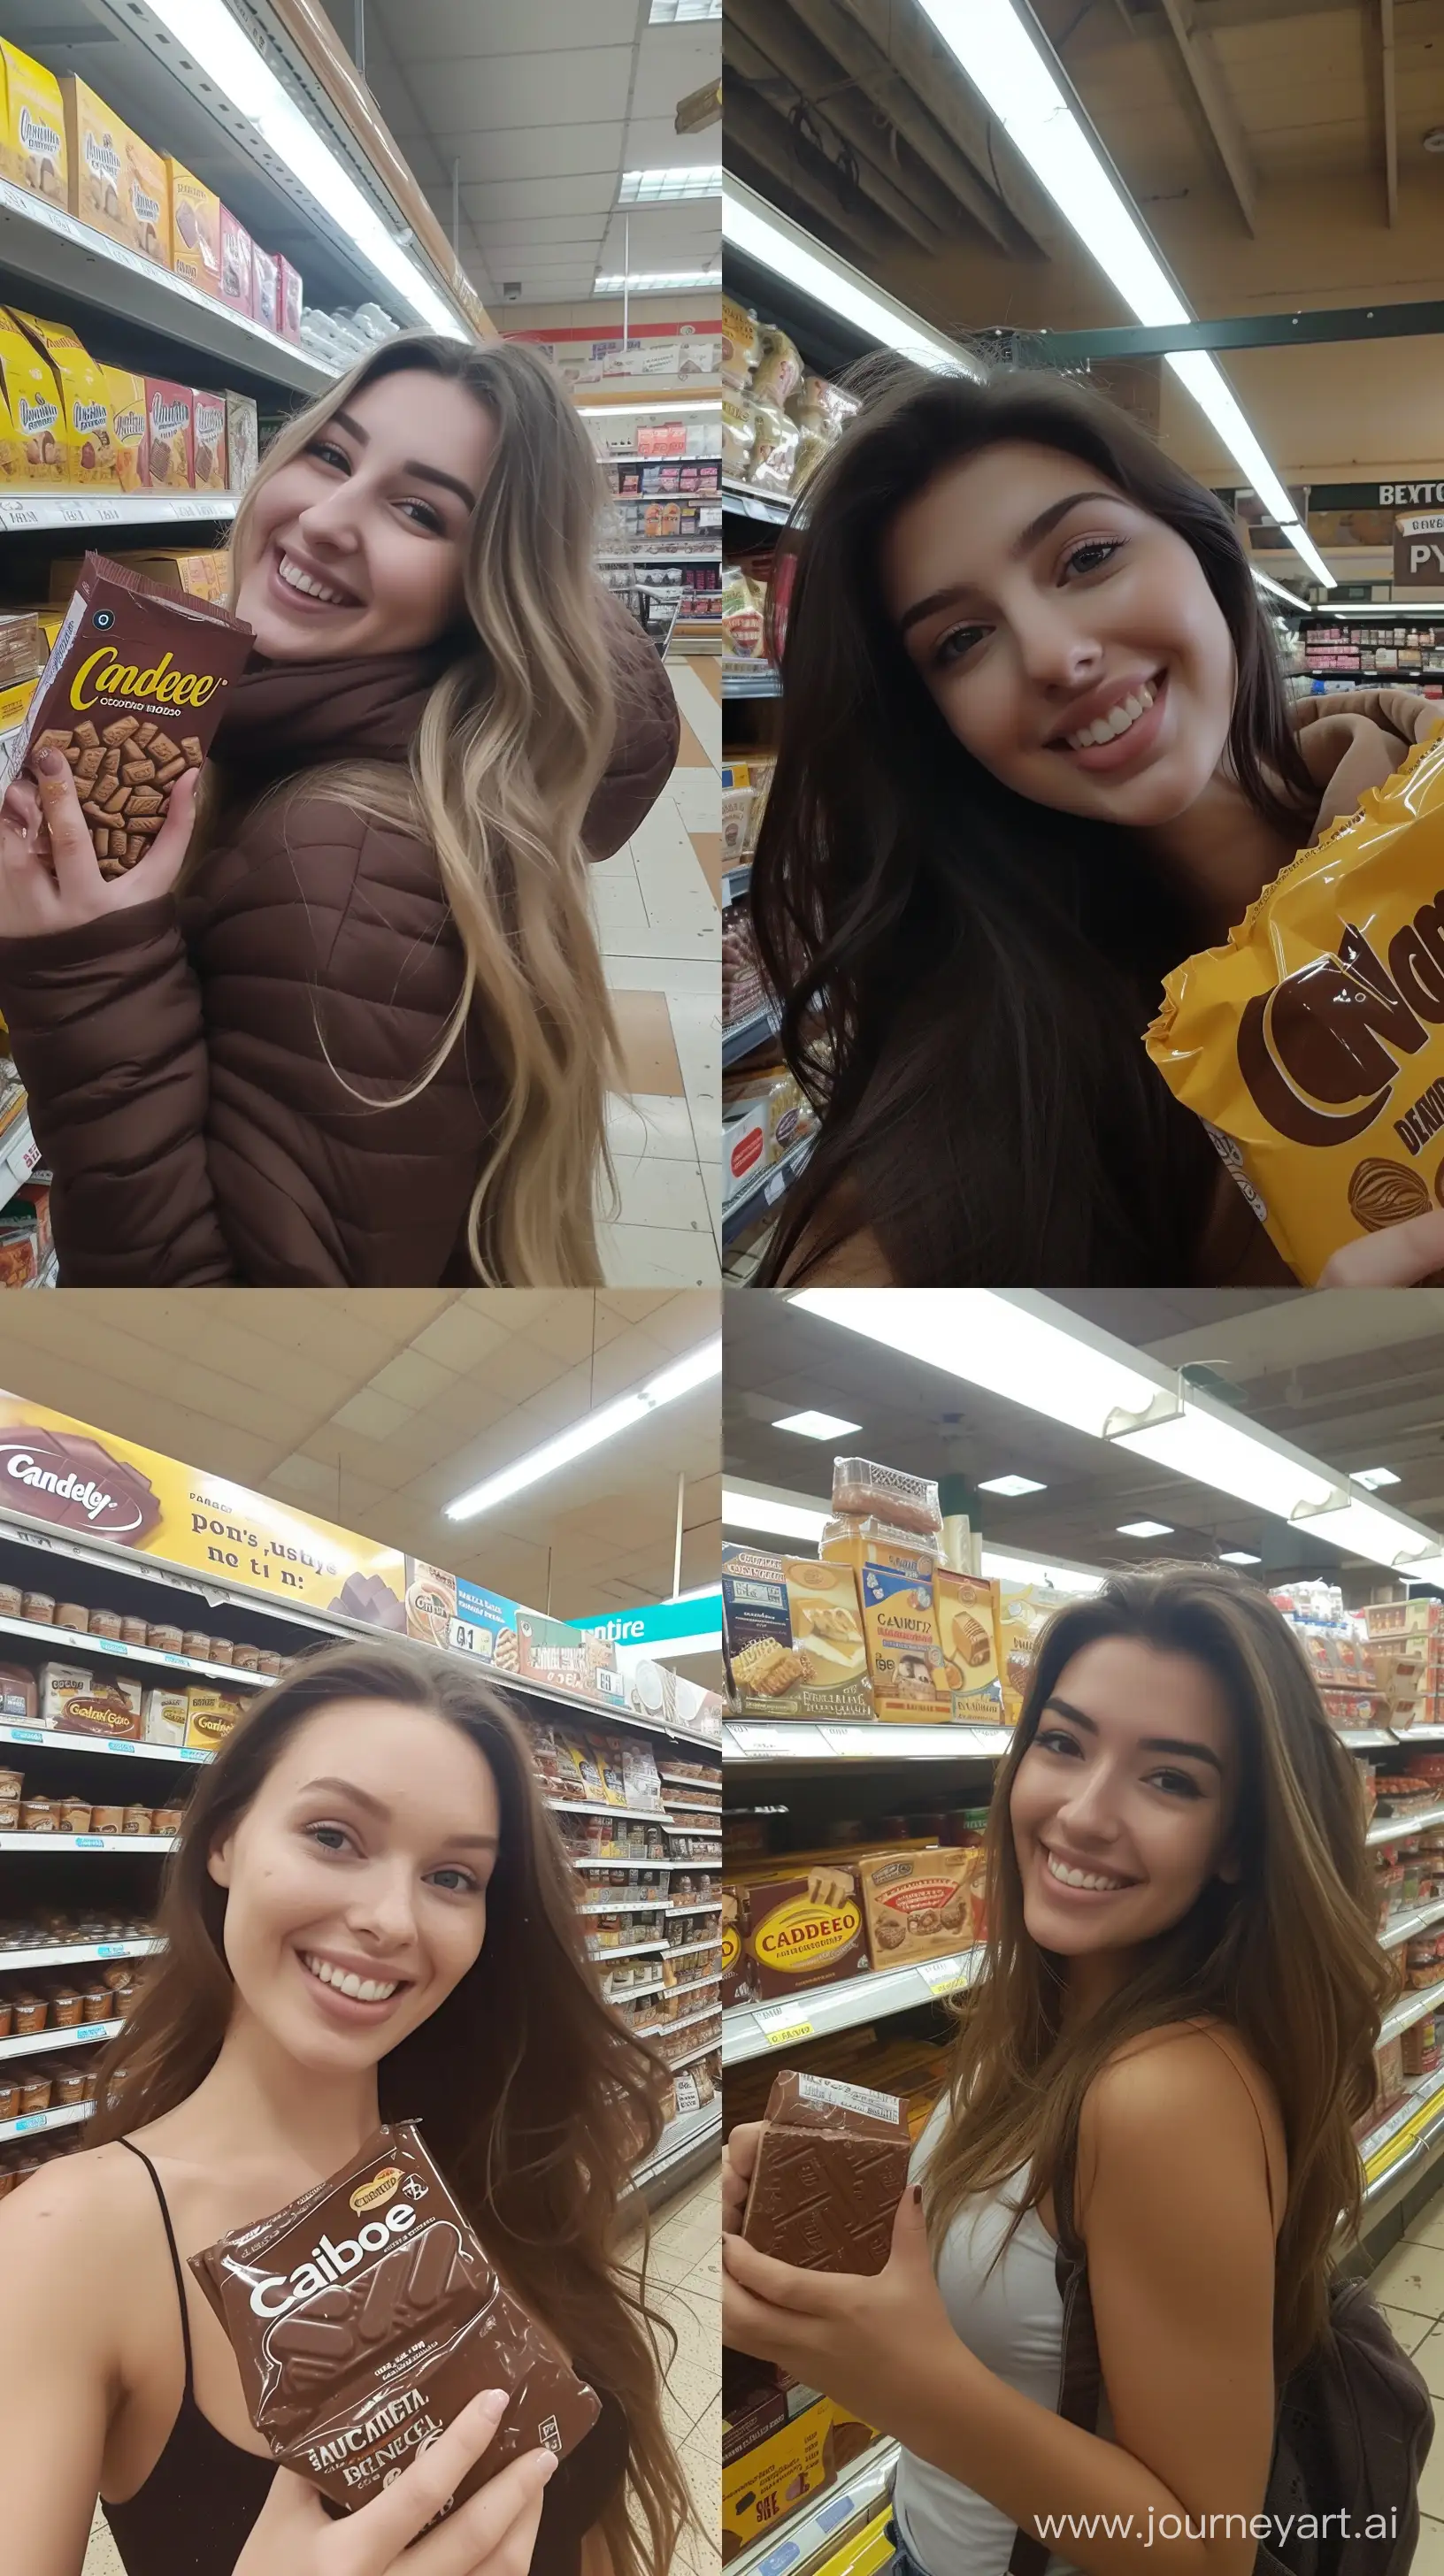 photo of attractive woman inside filthy grocery store,her robrey of one Cadbury big packet and smile, posted on snapchat --ar 9:16 --v 6